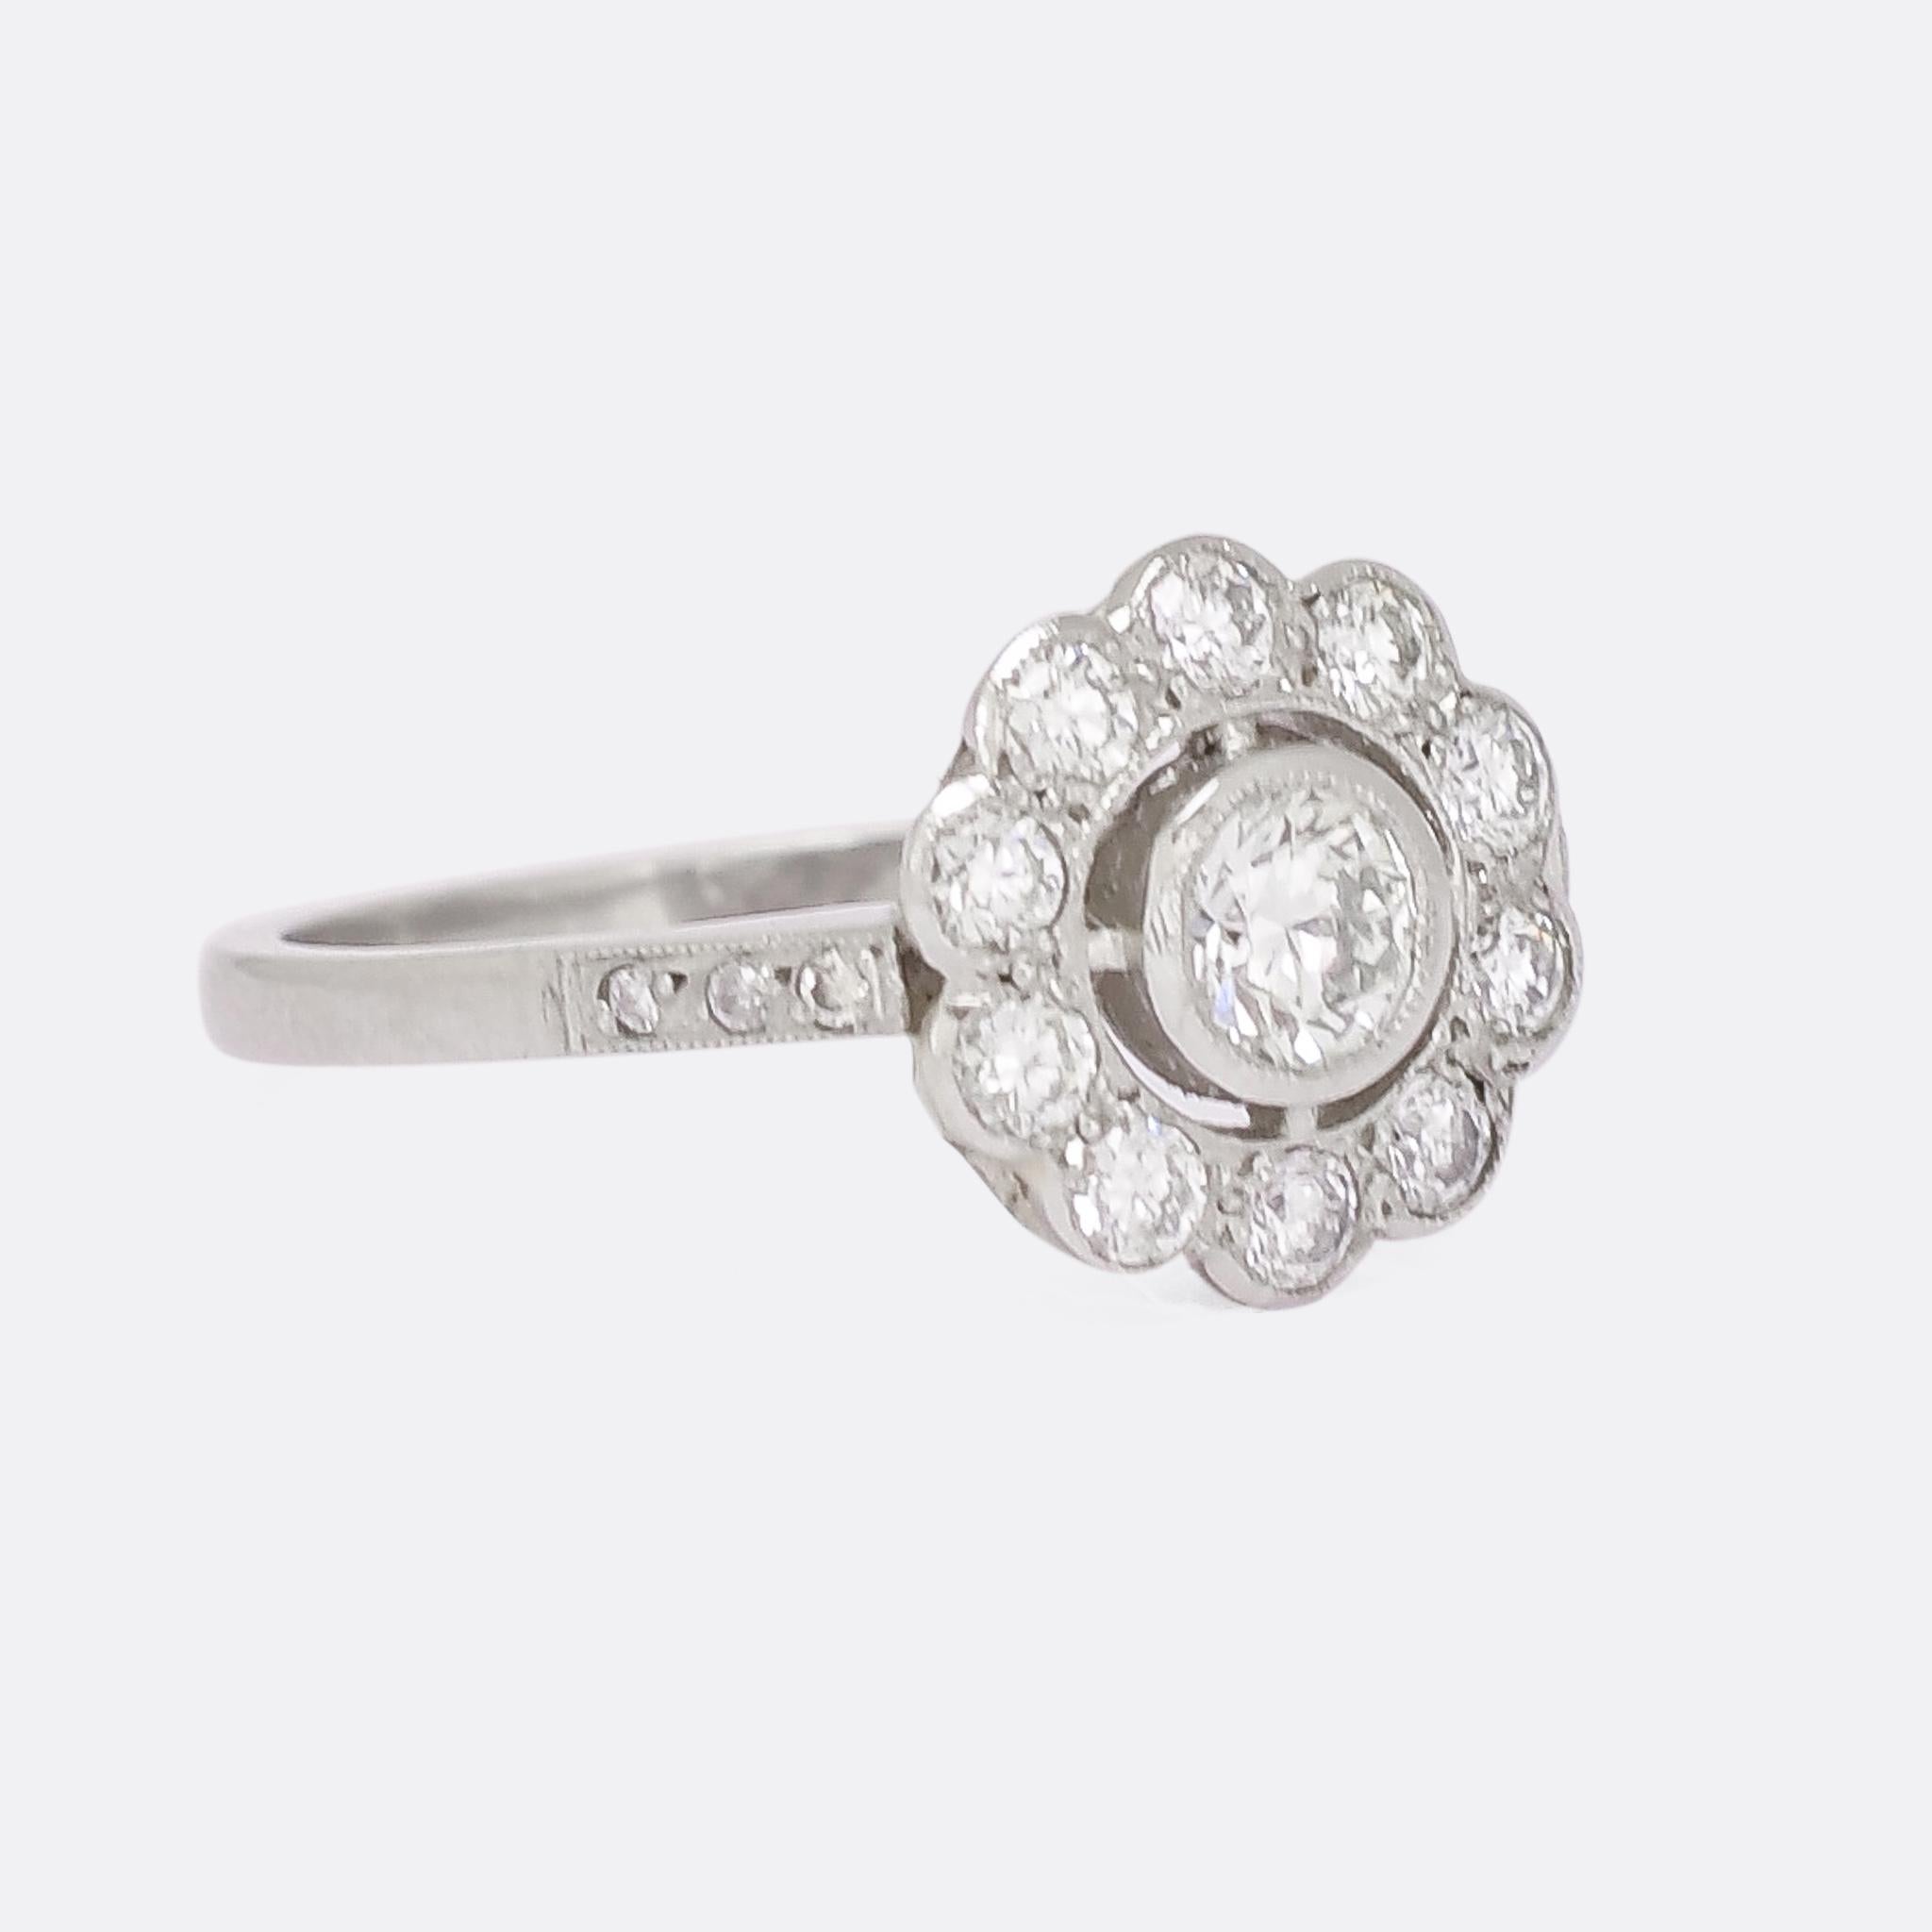 This stunning diamond cluster ring was made in the Edwardian era, circa 1910. The bright brilliant cut diamonds, .85ct total, are set in millegrain bezel settings with diamond shoulder accents, and the ring is modelled in platinum throughout. The